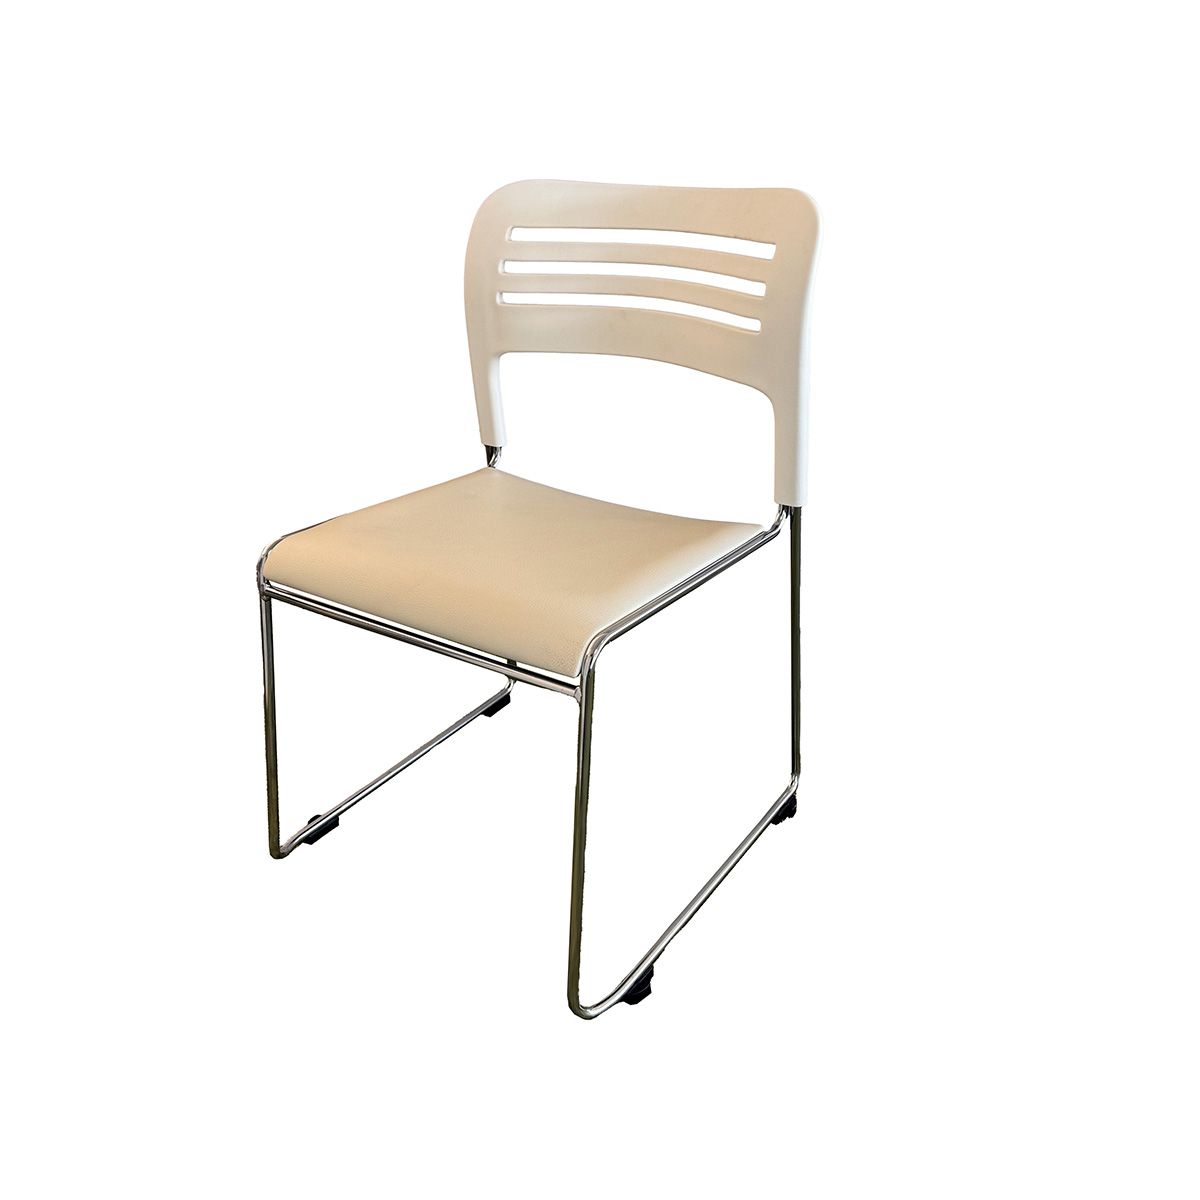 C61844 - The White Swifty Chair